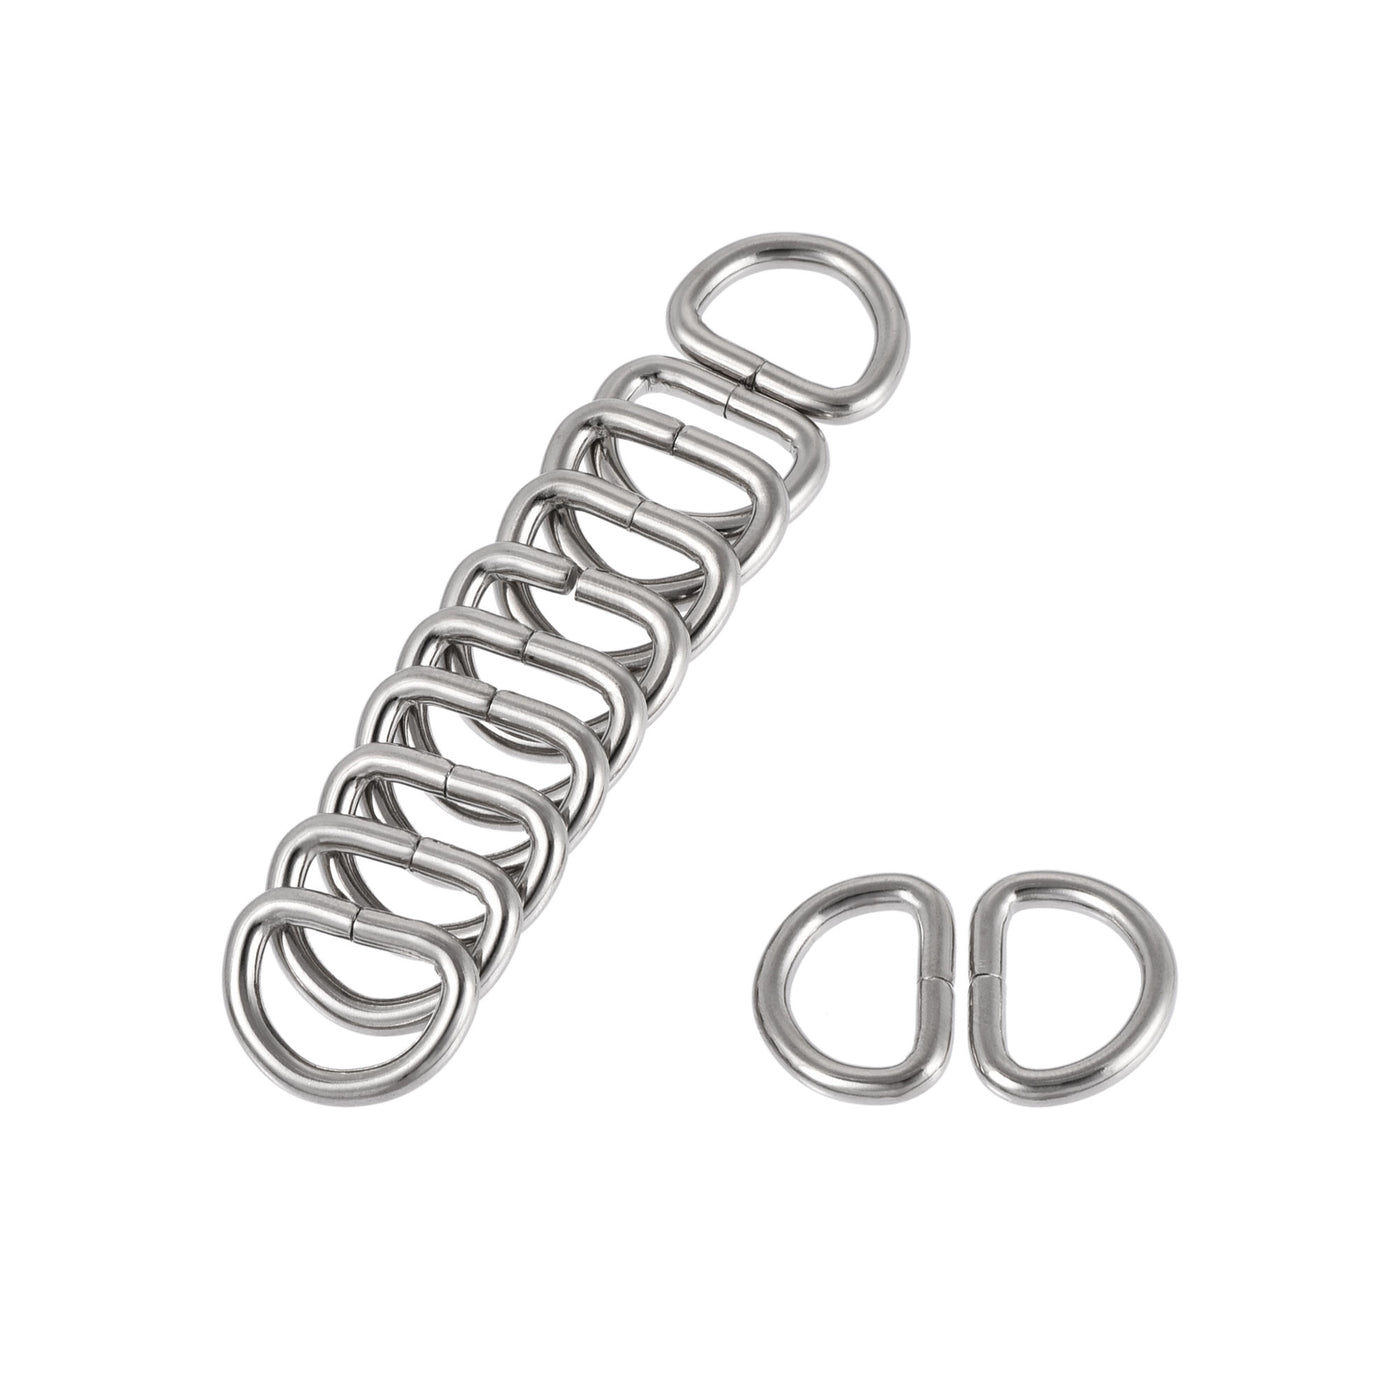 uxcell Uxcell Metal D Ring 0.51"(13mm) D-Rings Buckle for Hardware Bags Belts Craft DIY Accessories Silver Tone 150pcs